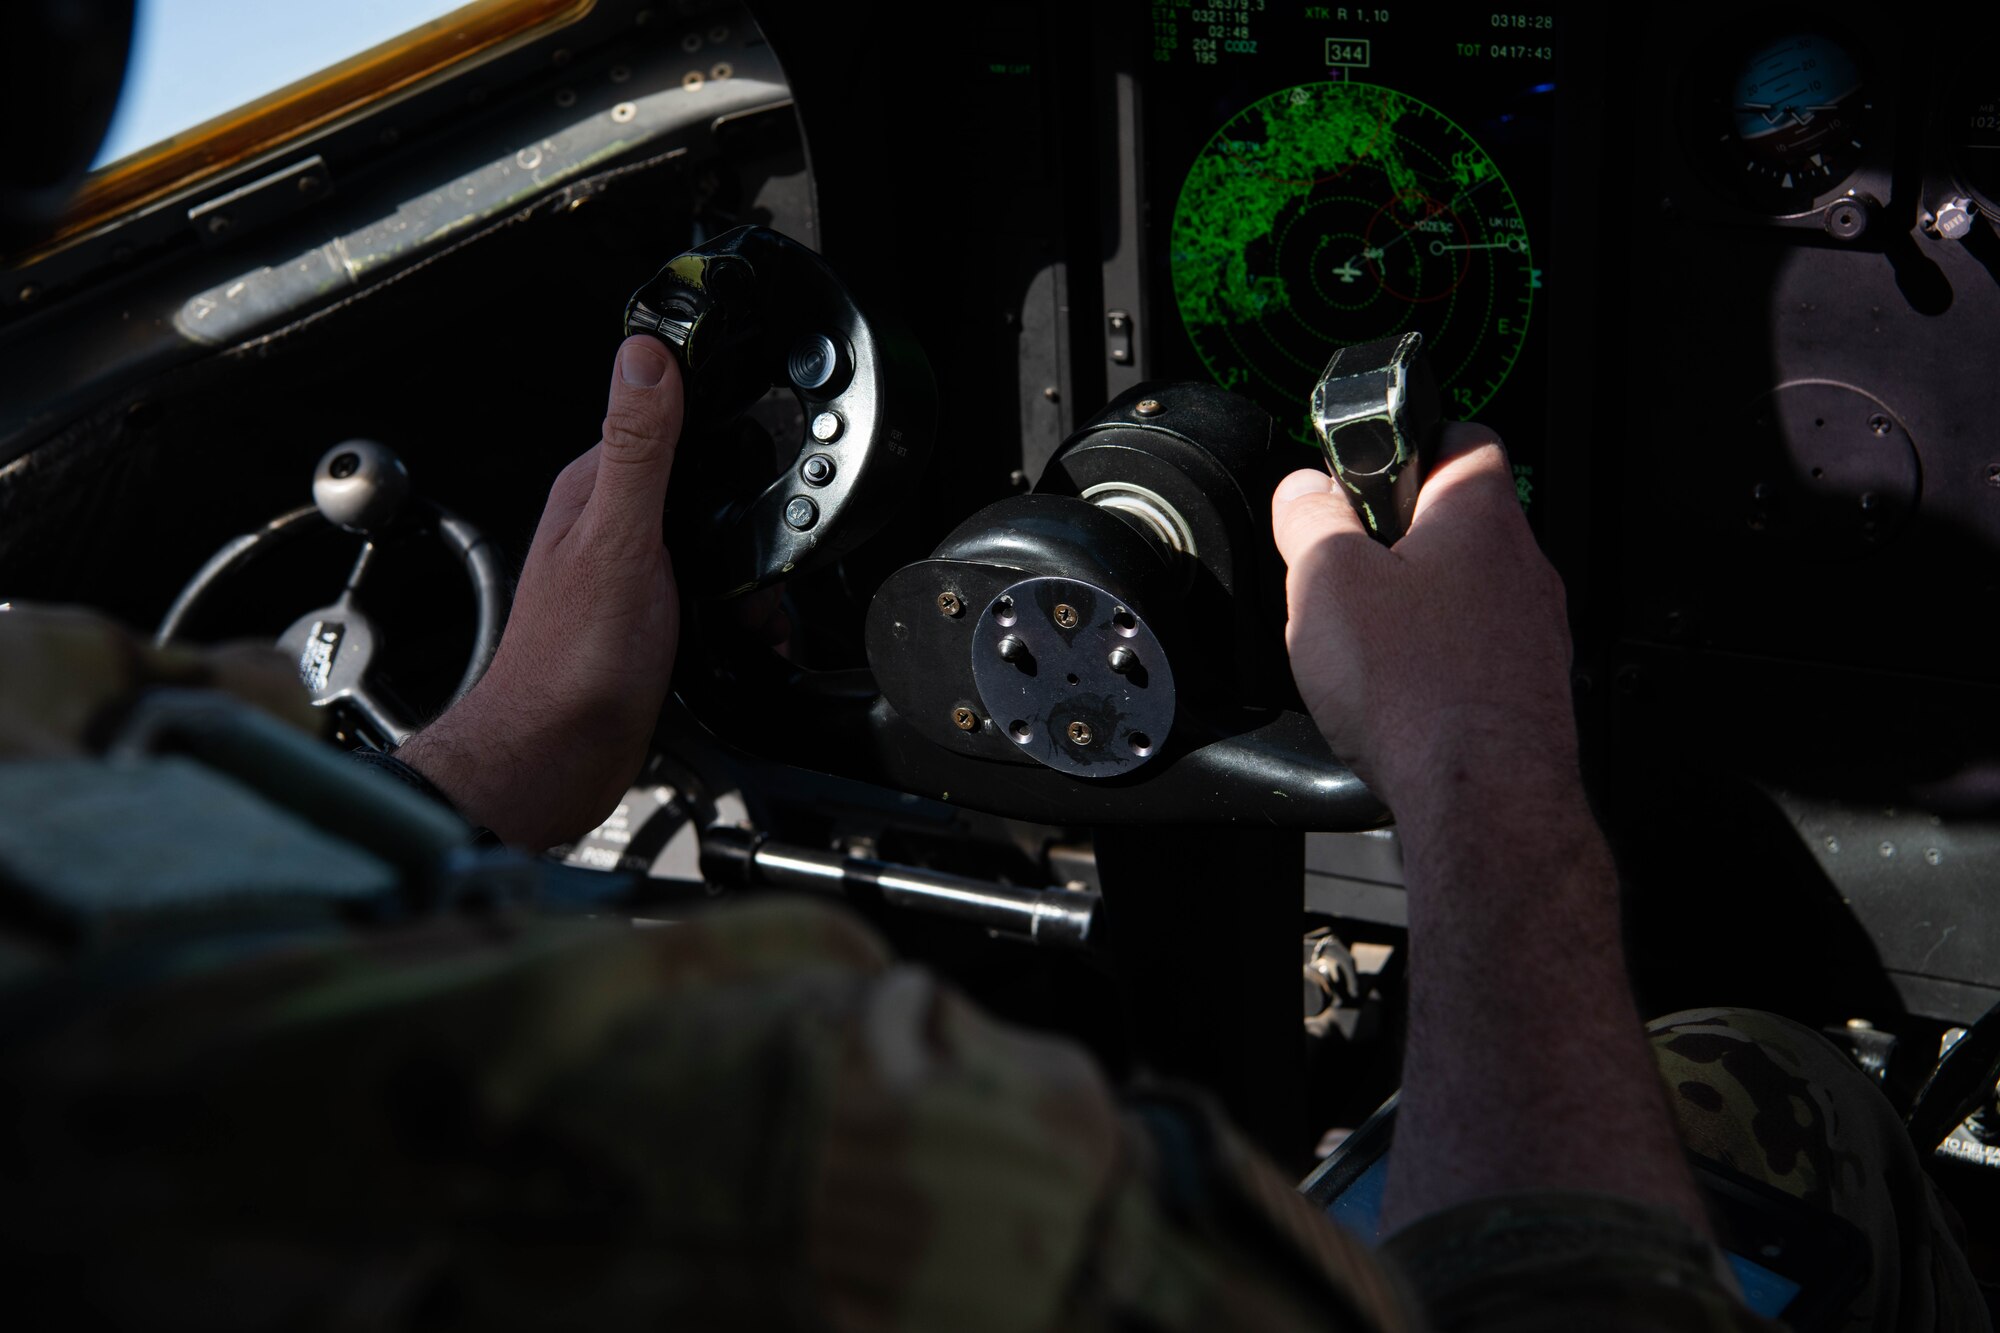 An Airman holds the controls of an aircraft.